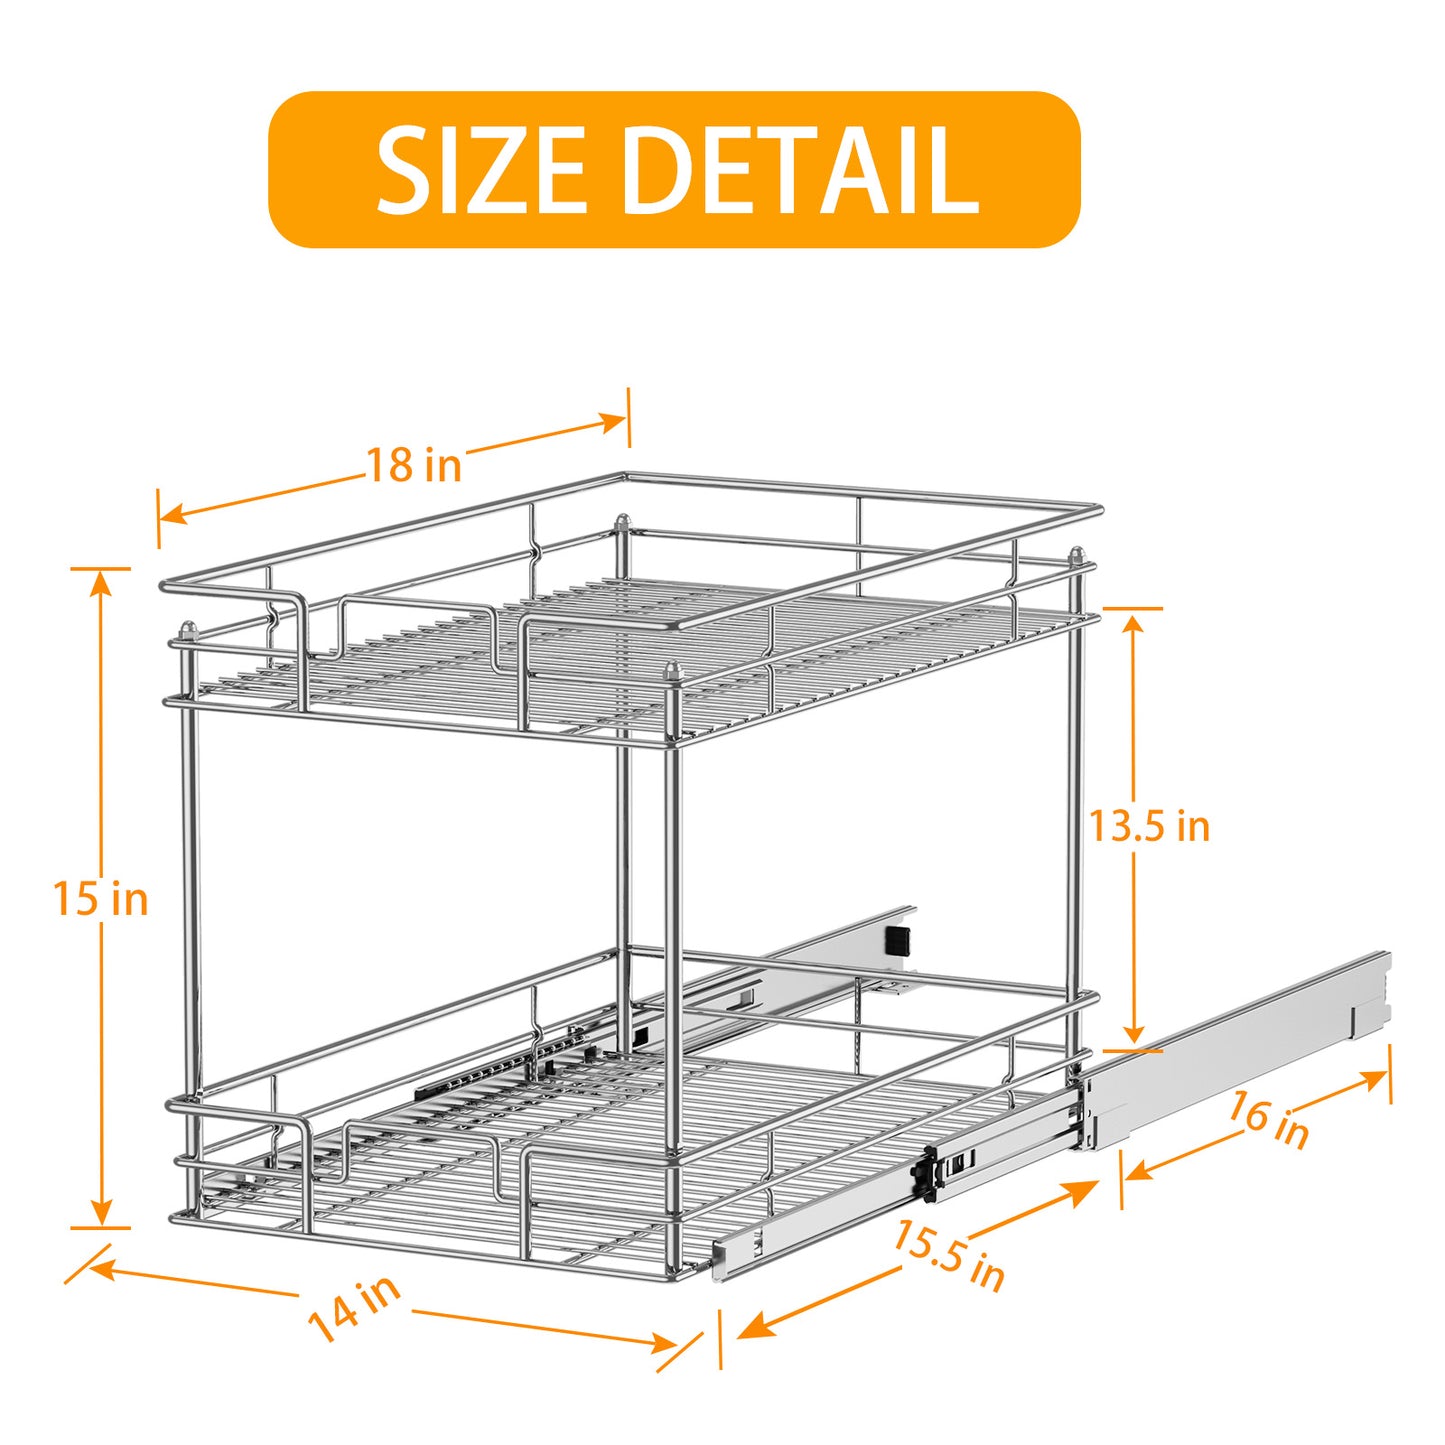 2-Tier Pull-Out Cabinet Organizer RS